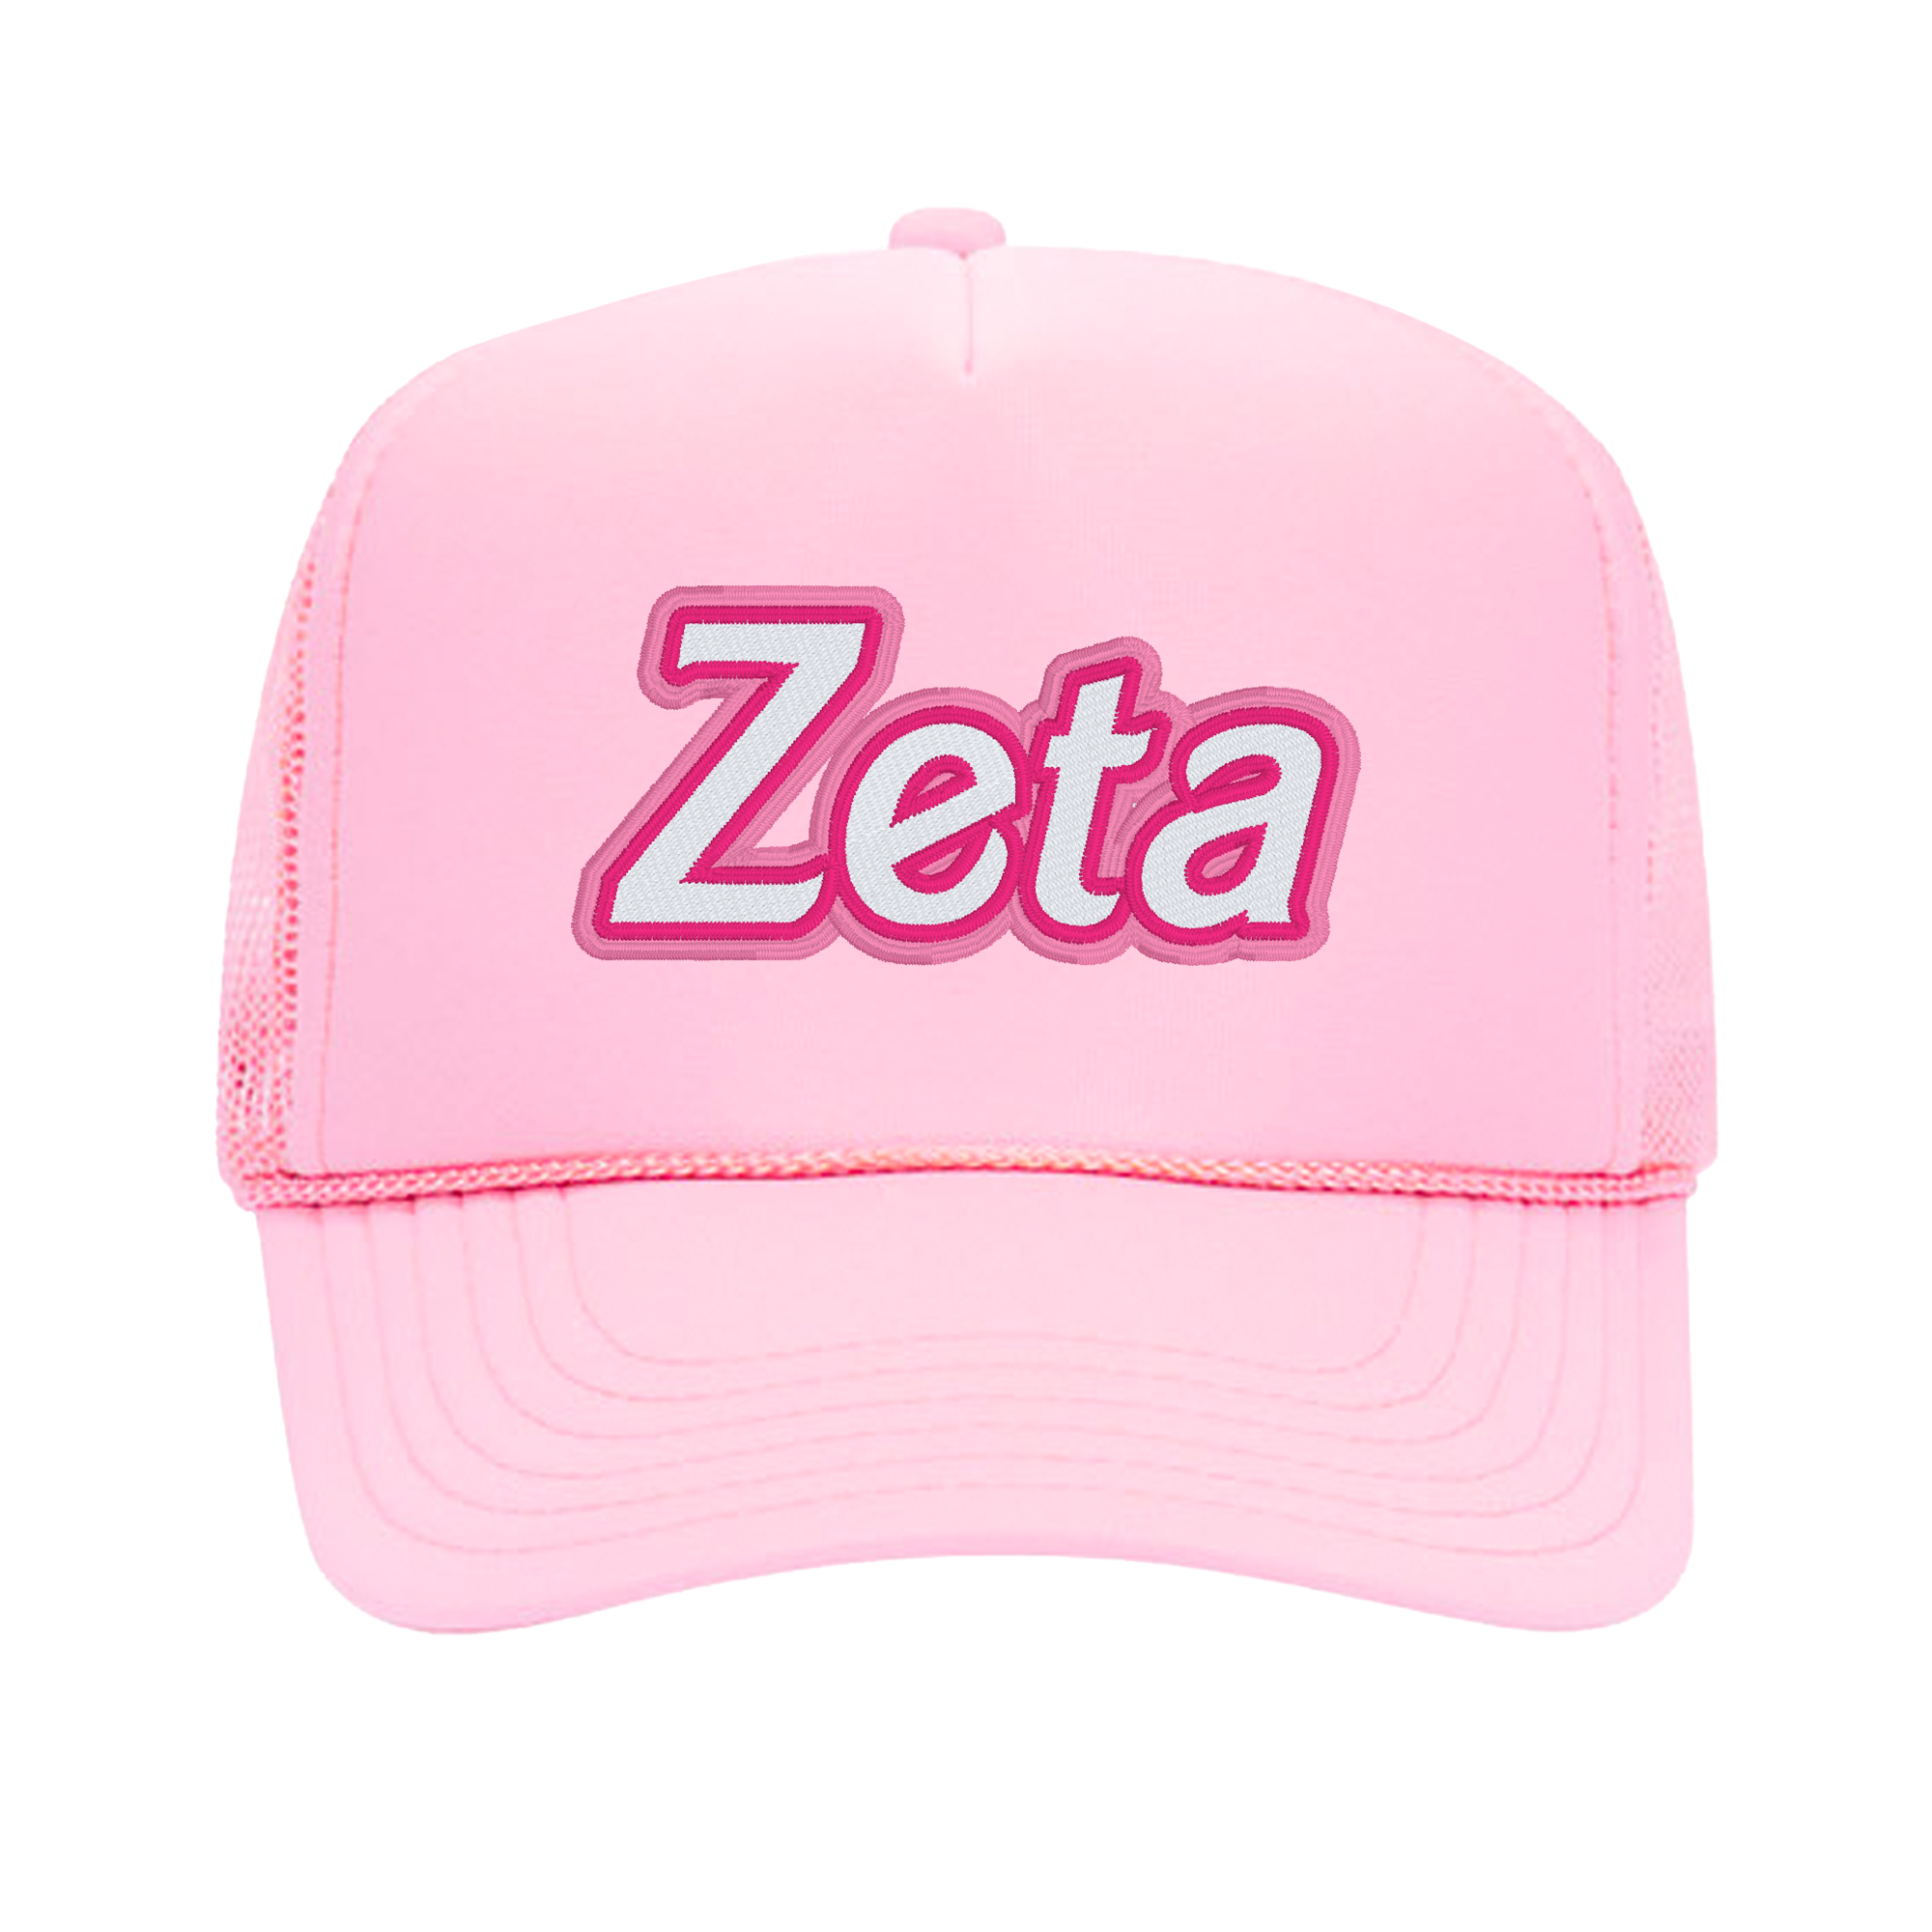 a pink hat with the word zeta printed on it